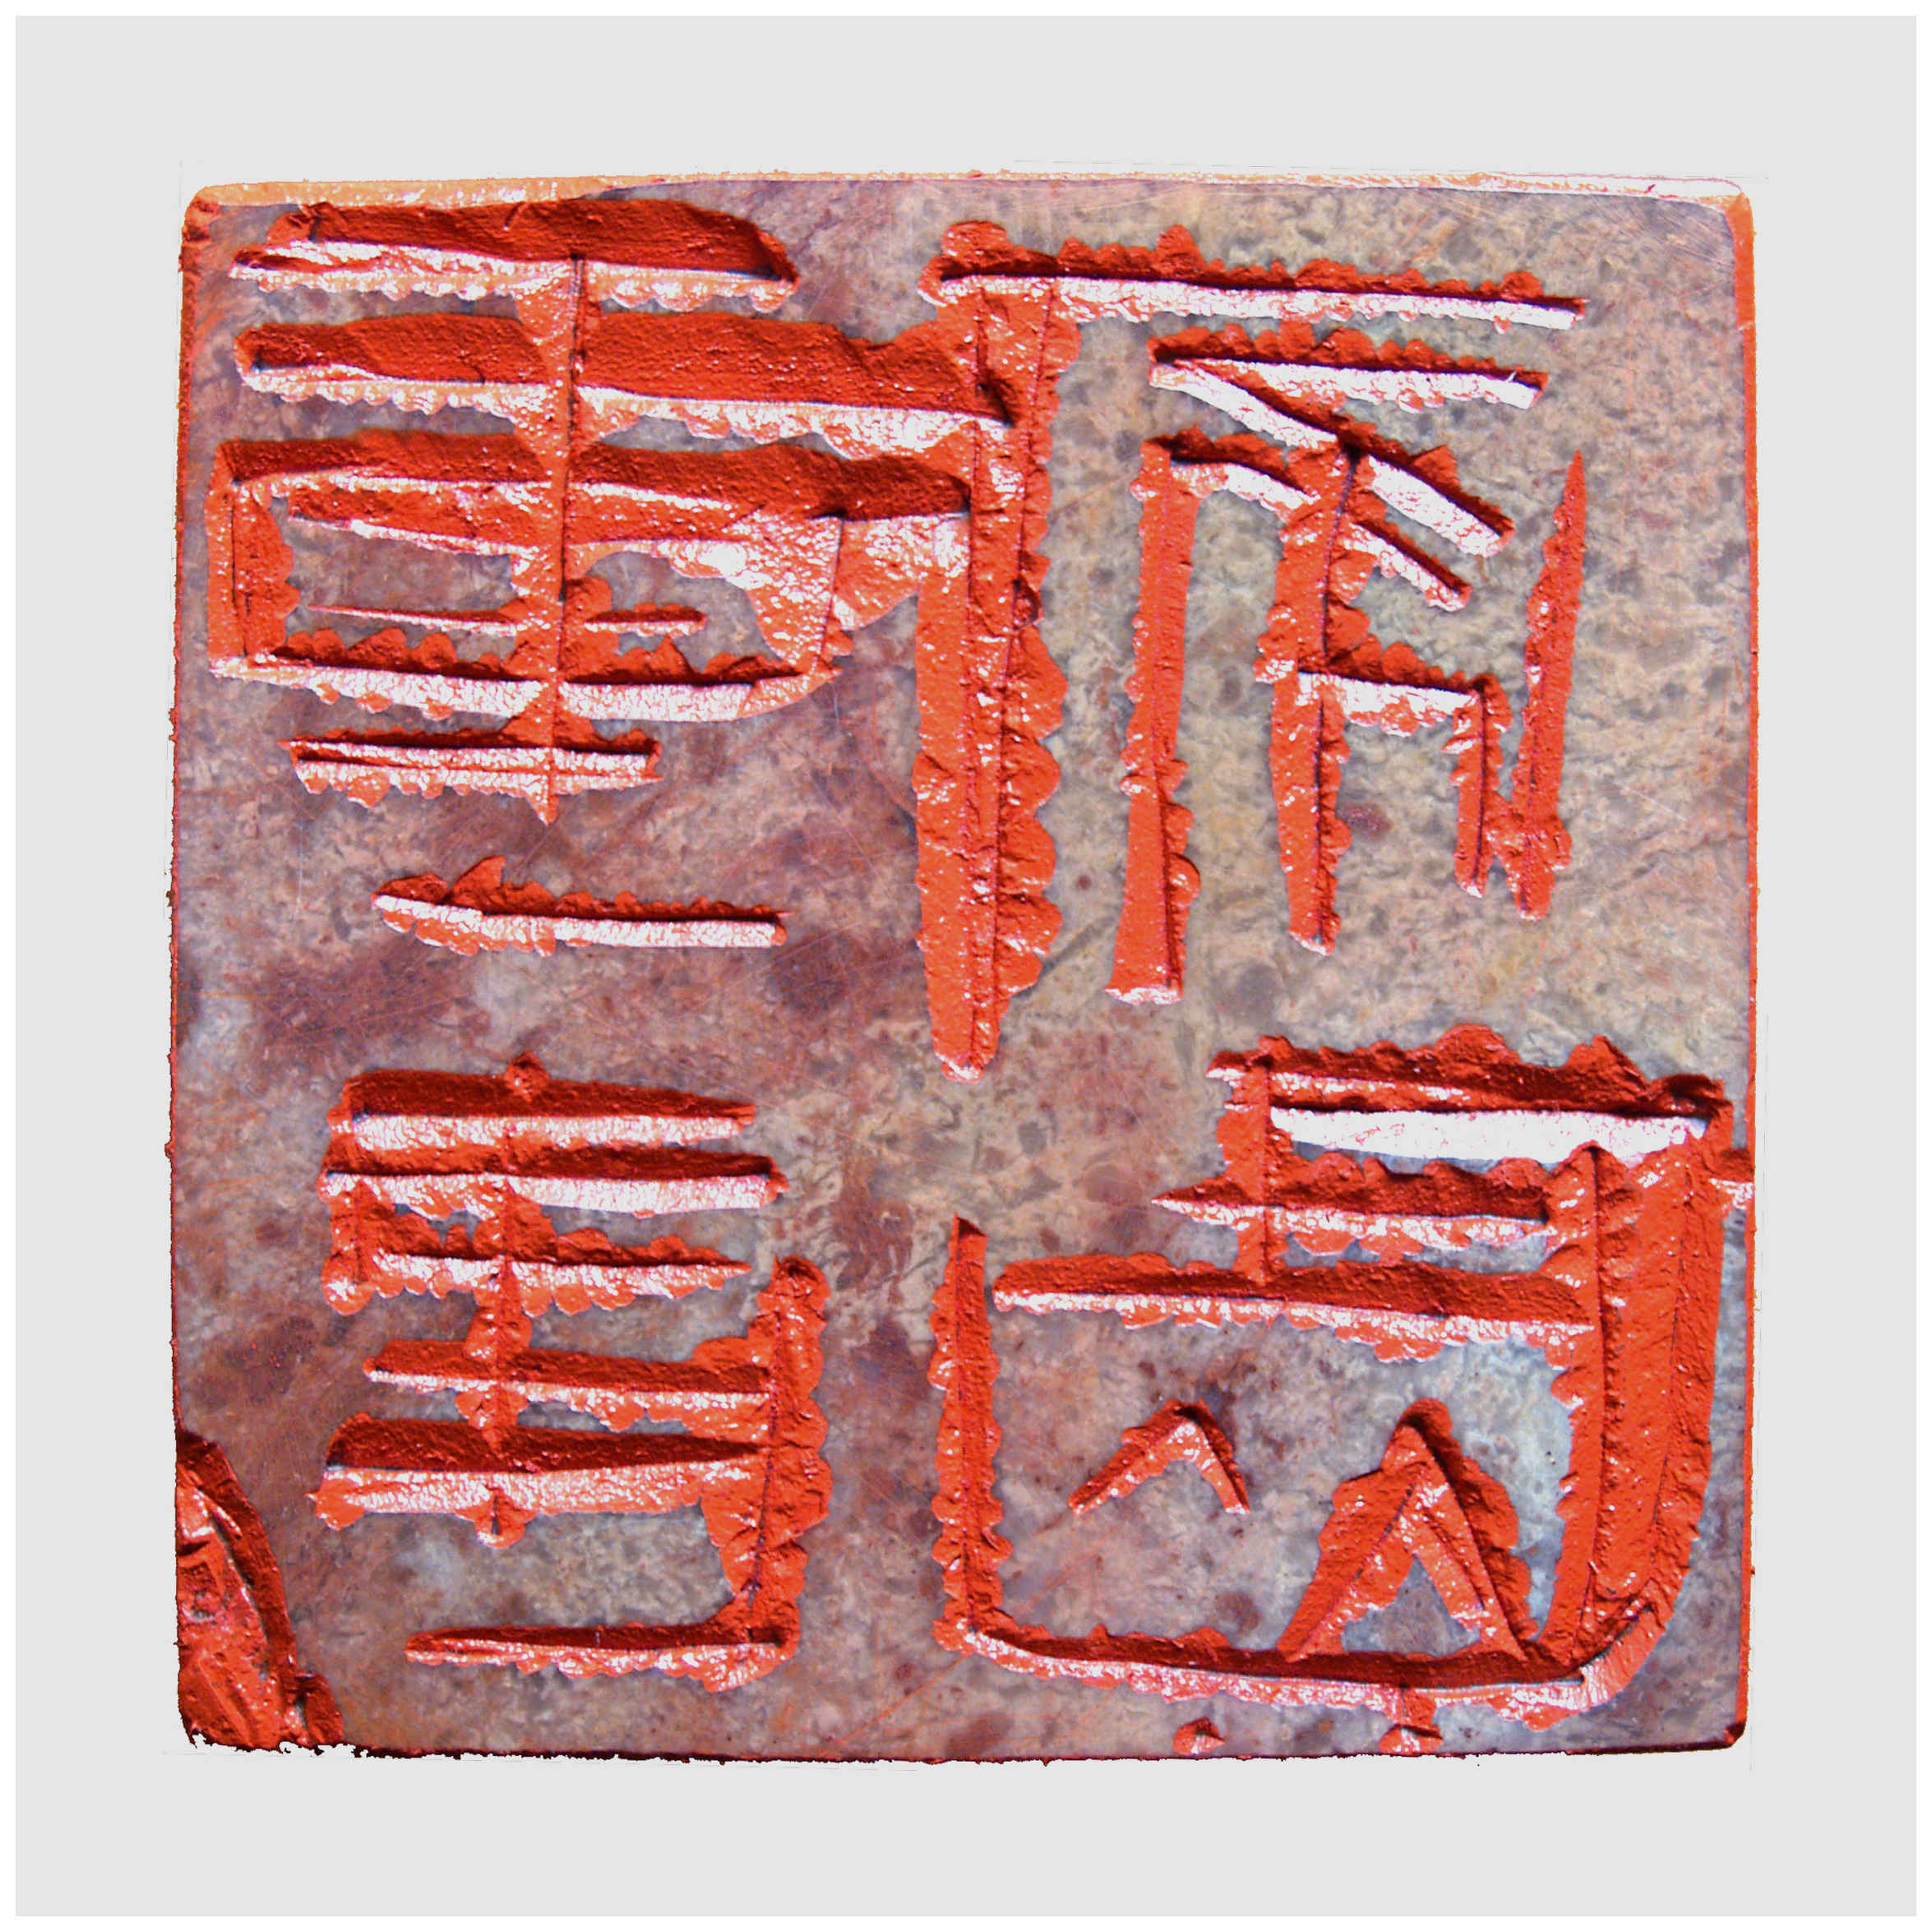 Sai Koh (Qi Hong)’s freehand brushwork Chinese seal carving (Chinese seal engraving, Chinese seal cutting) - The Active Shoushan Stone Surface Carved in Intaglio with Chinese Characters (Rebuild Homeland), 90×90mm